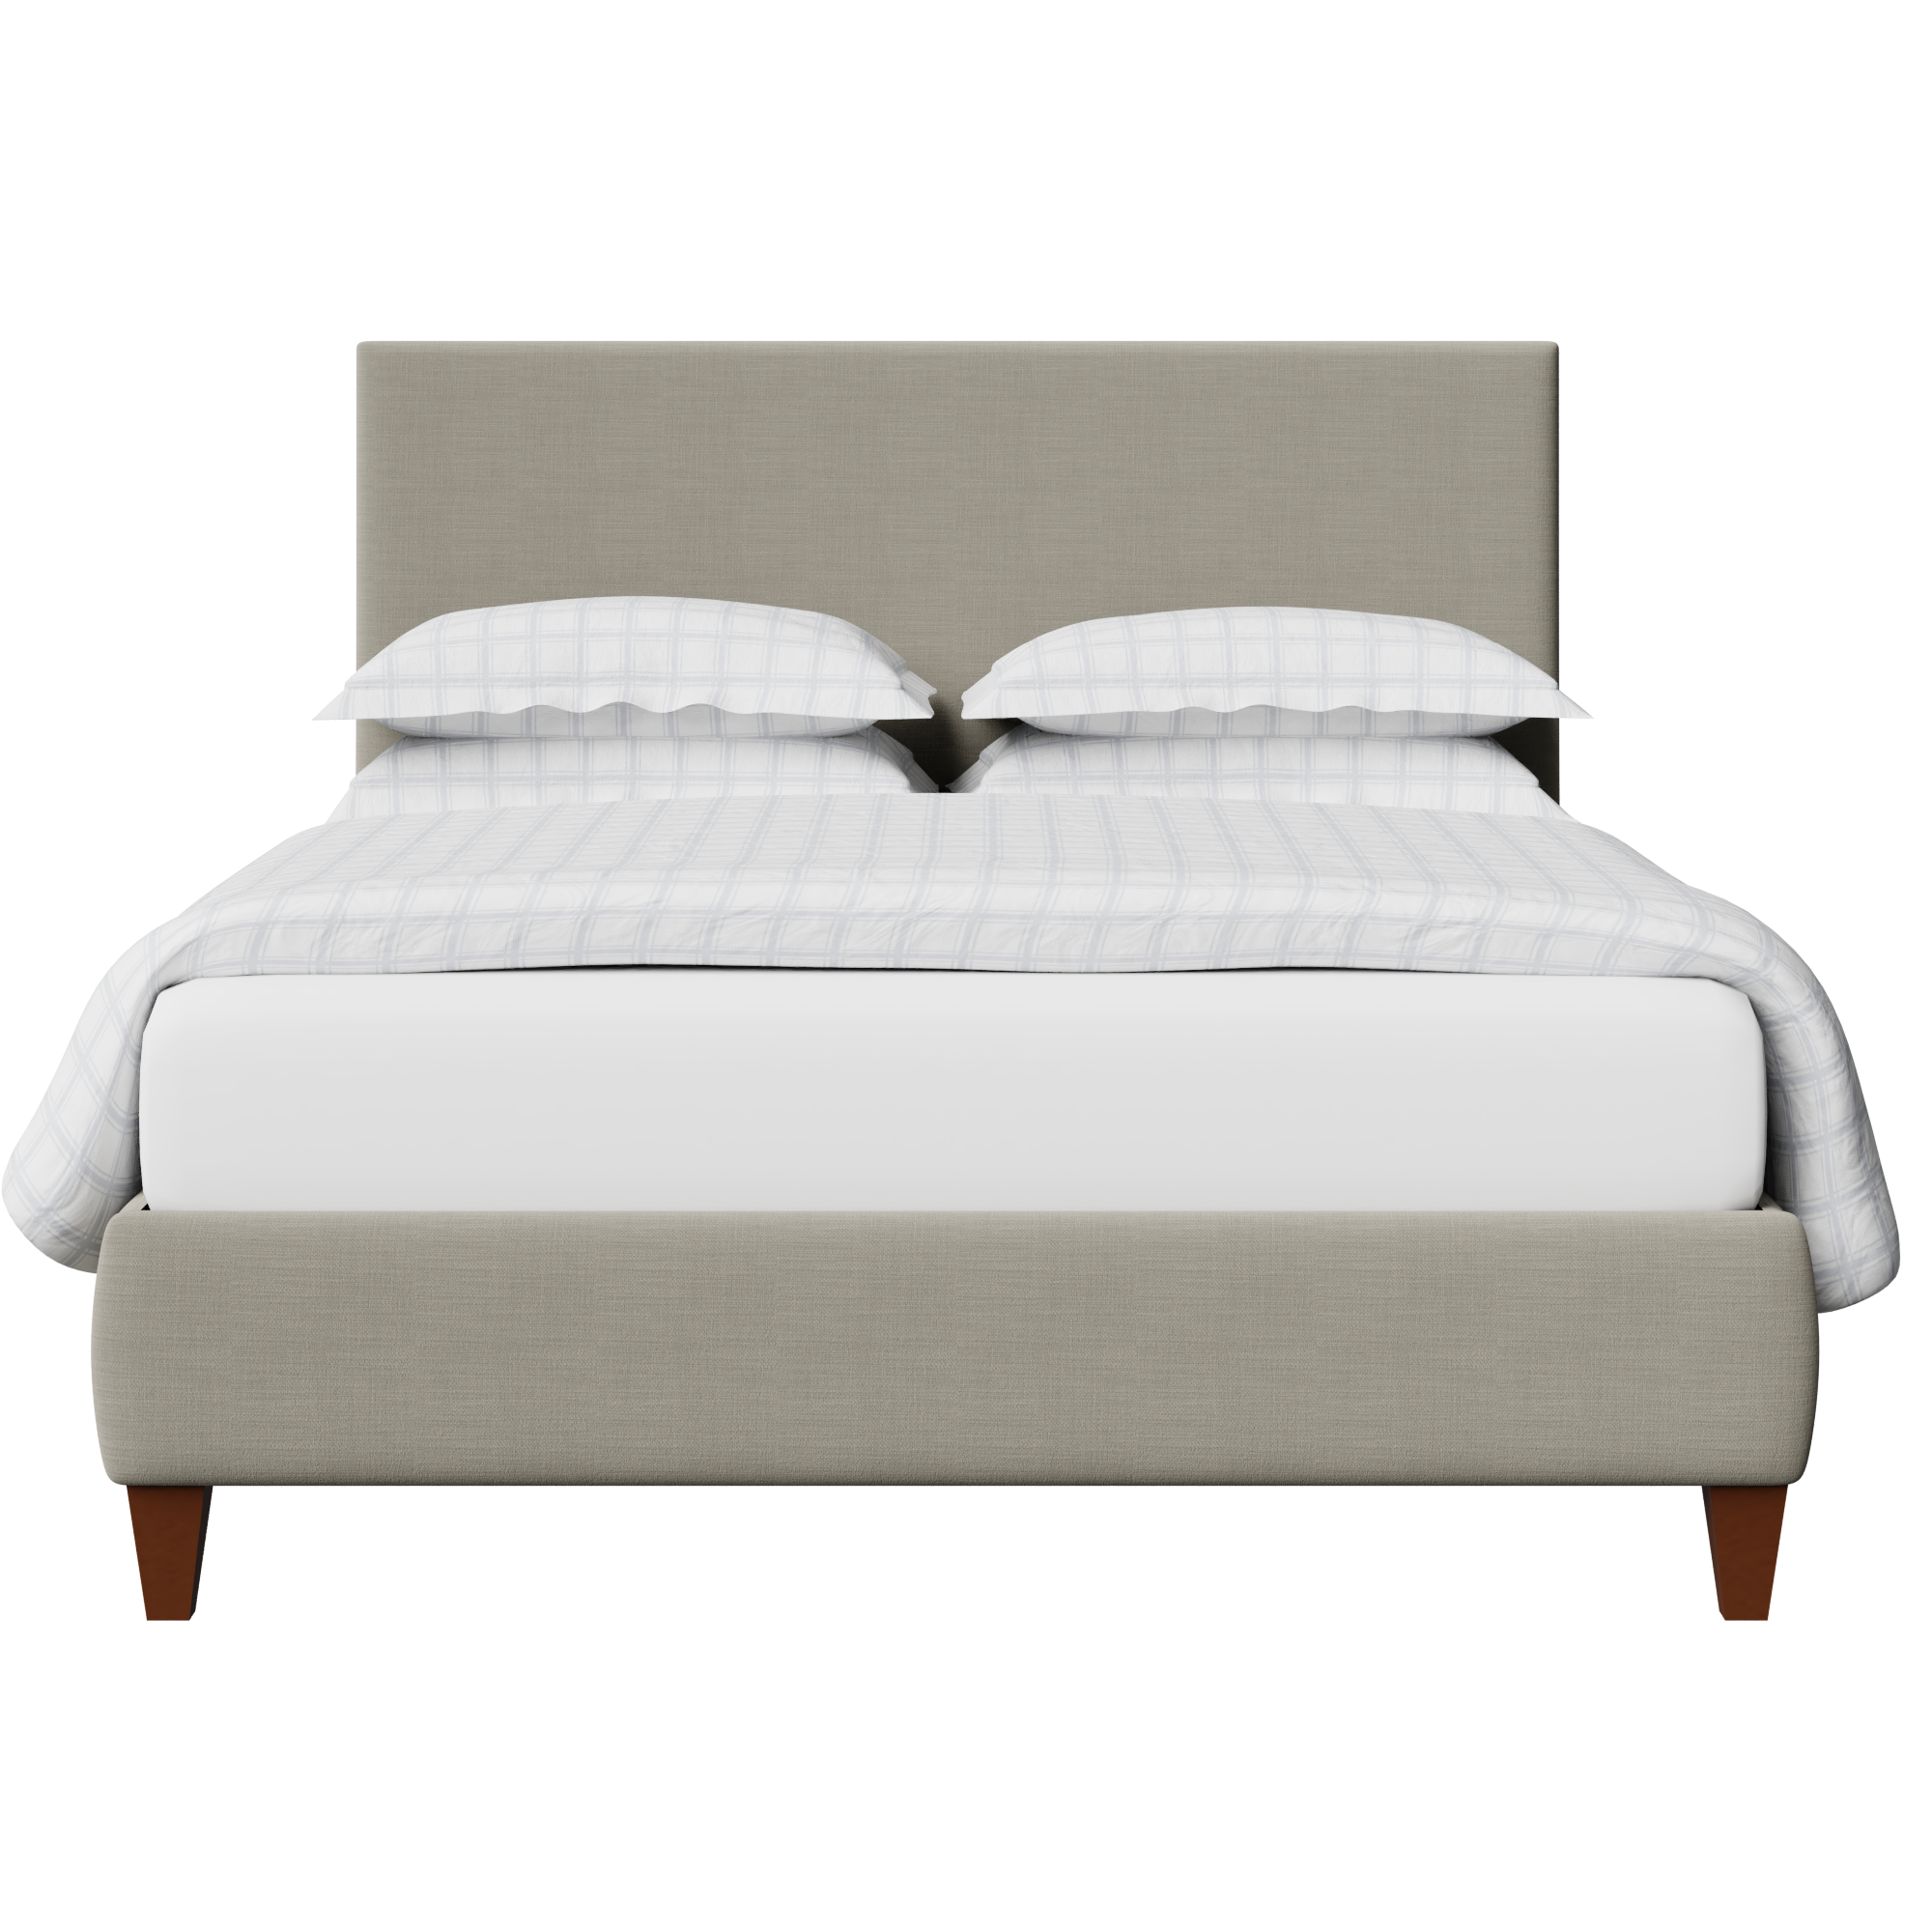 Yushan upholstered bed in grey fabric